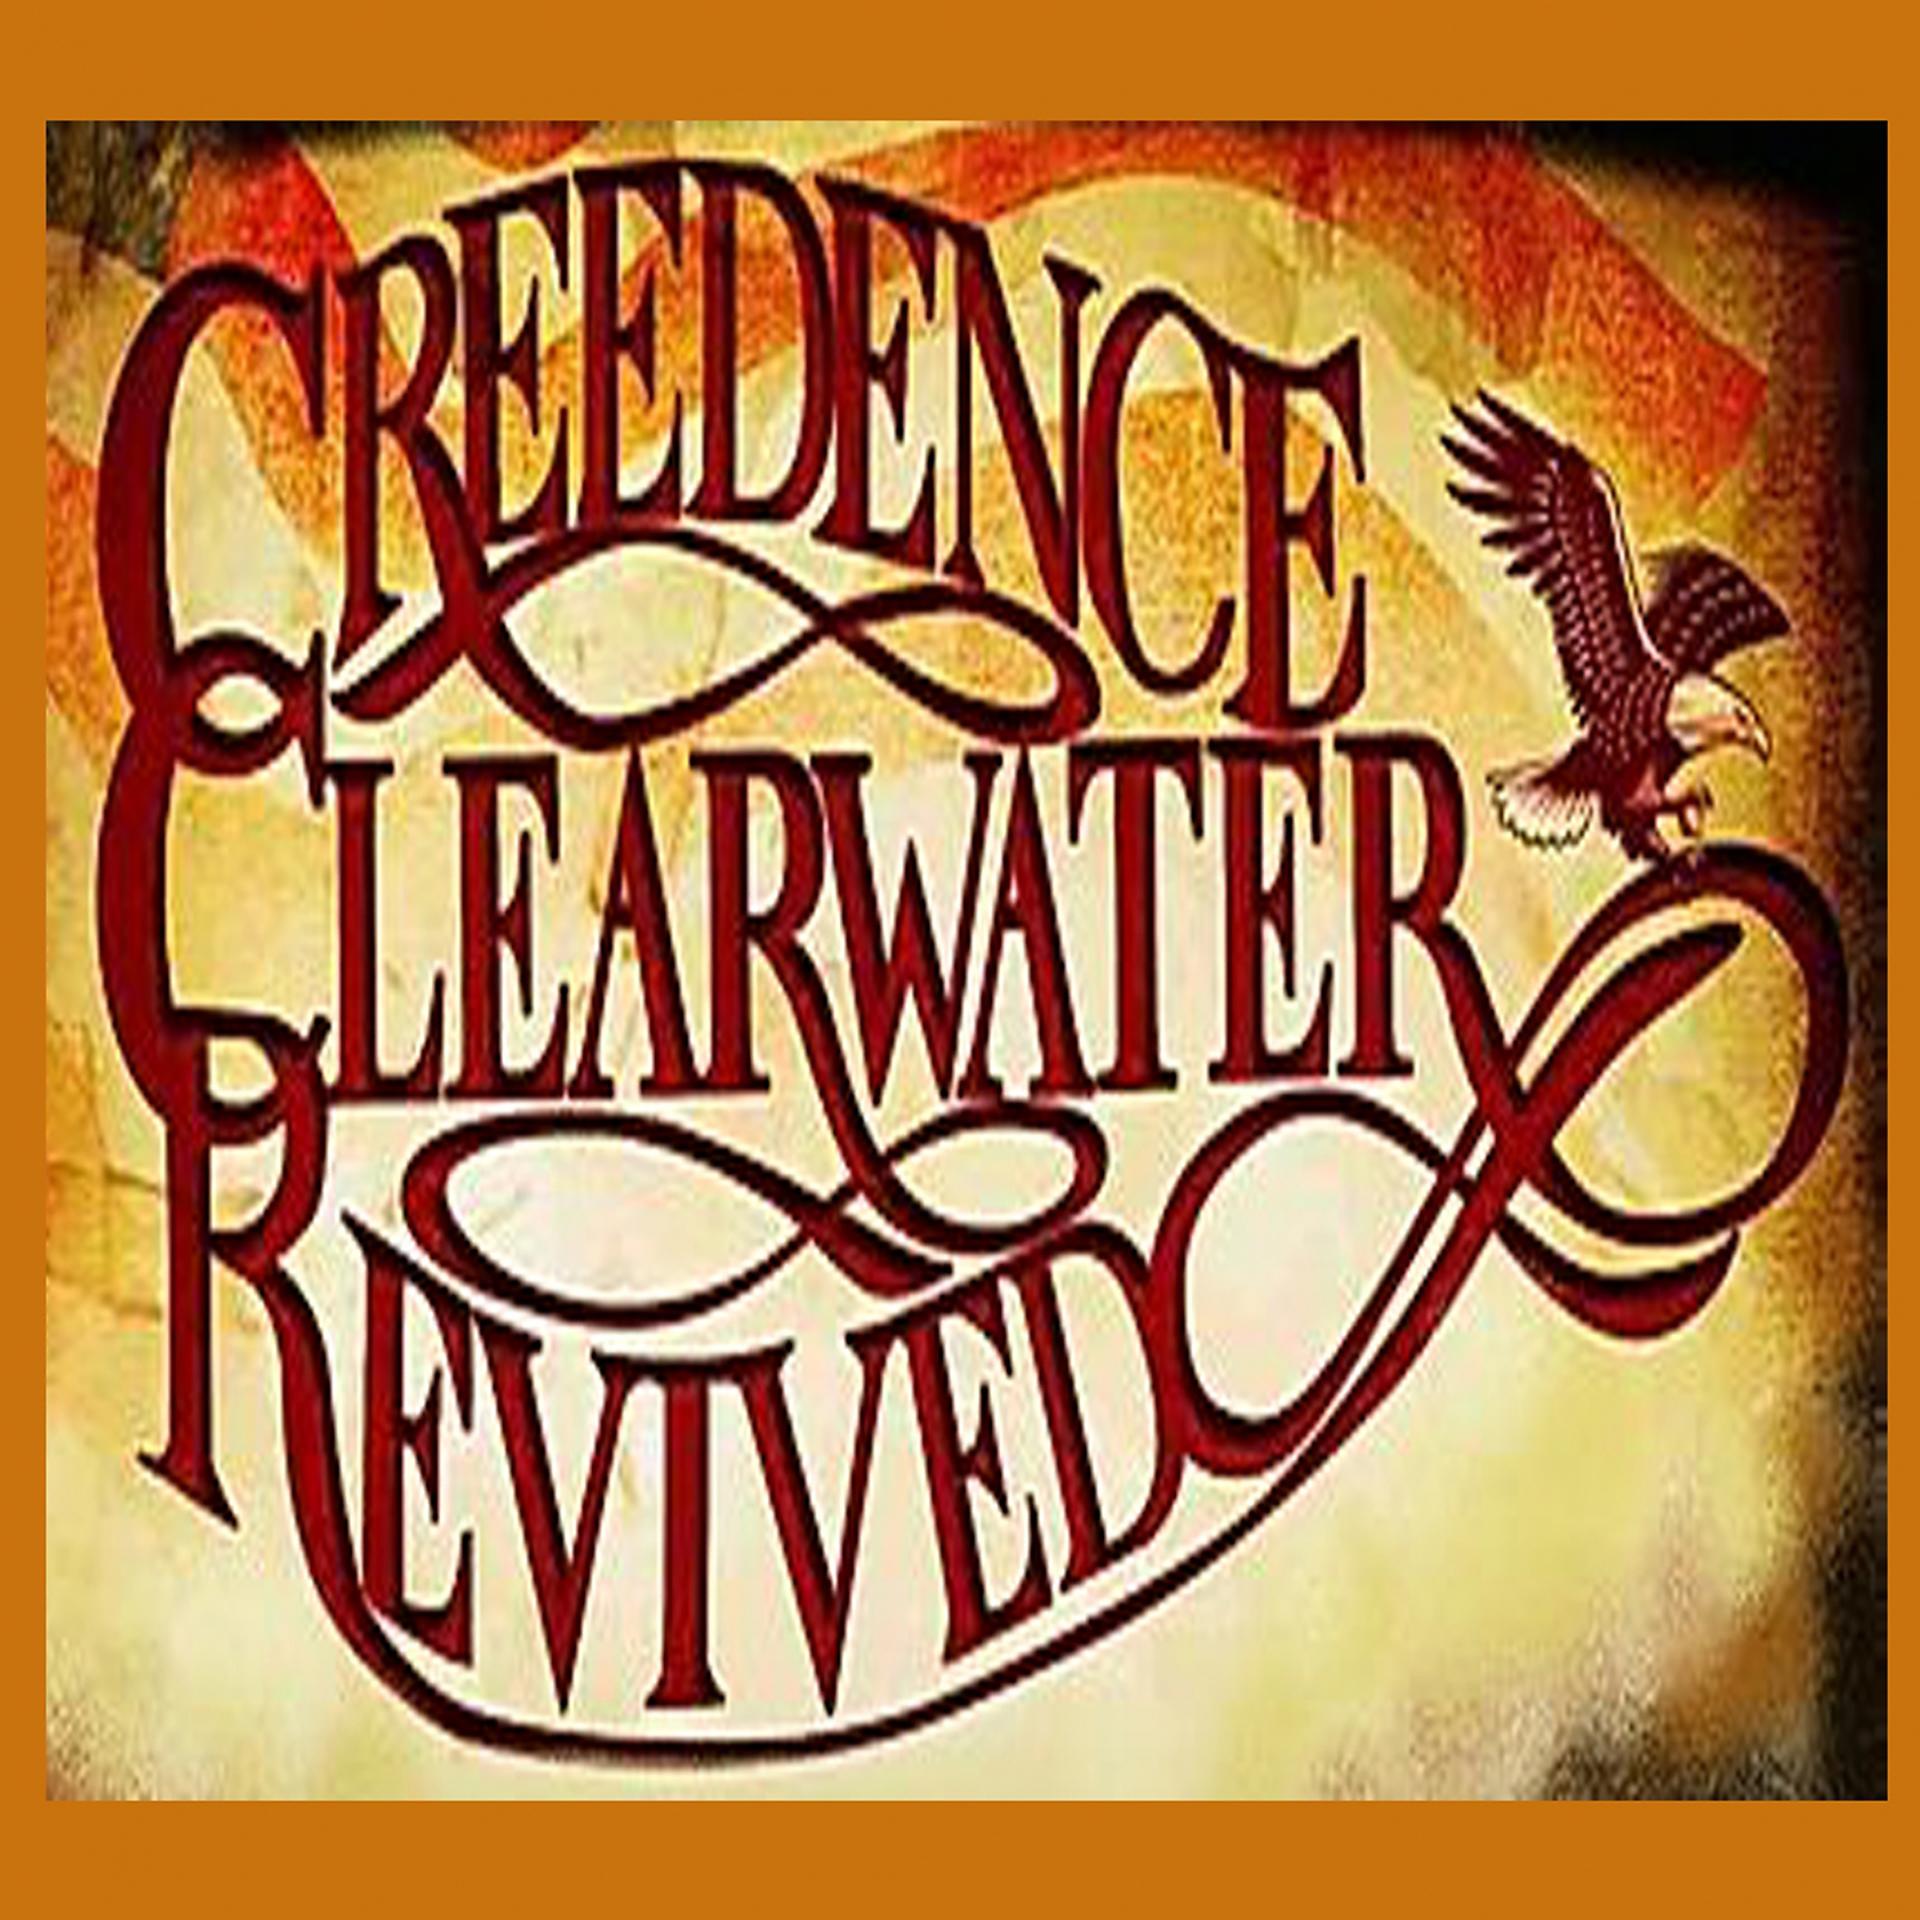 See the rain creedence. Creedence Clearwater Revival - have you ever seen the Rain.